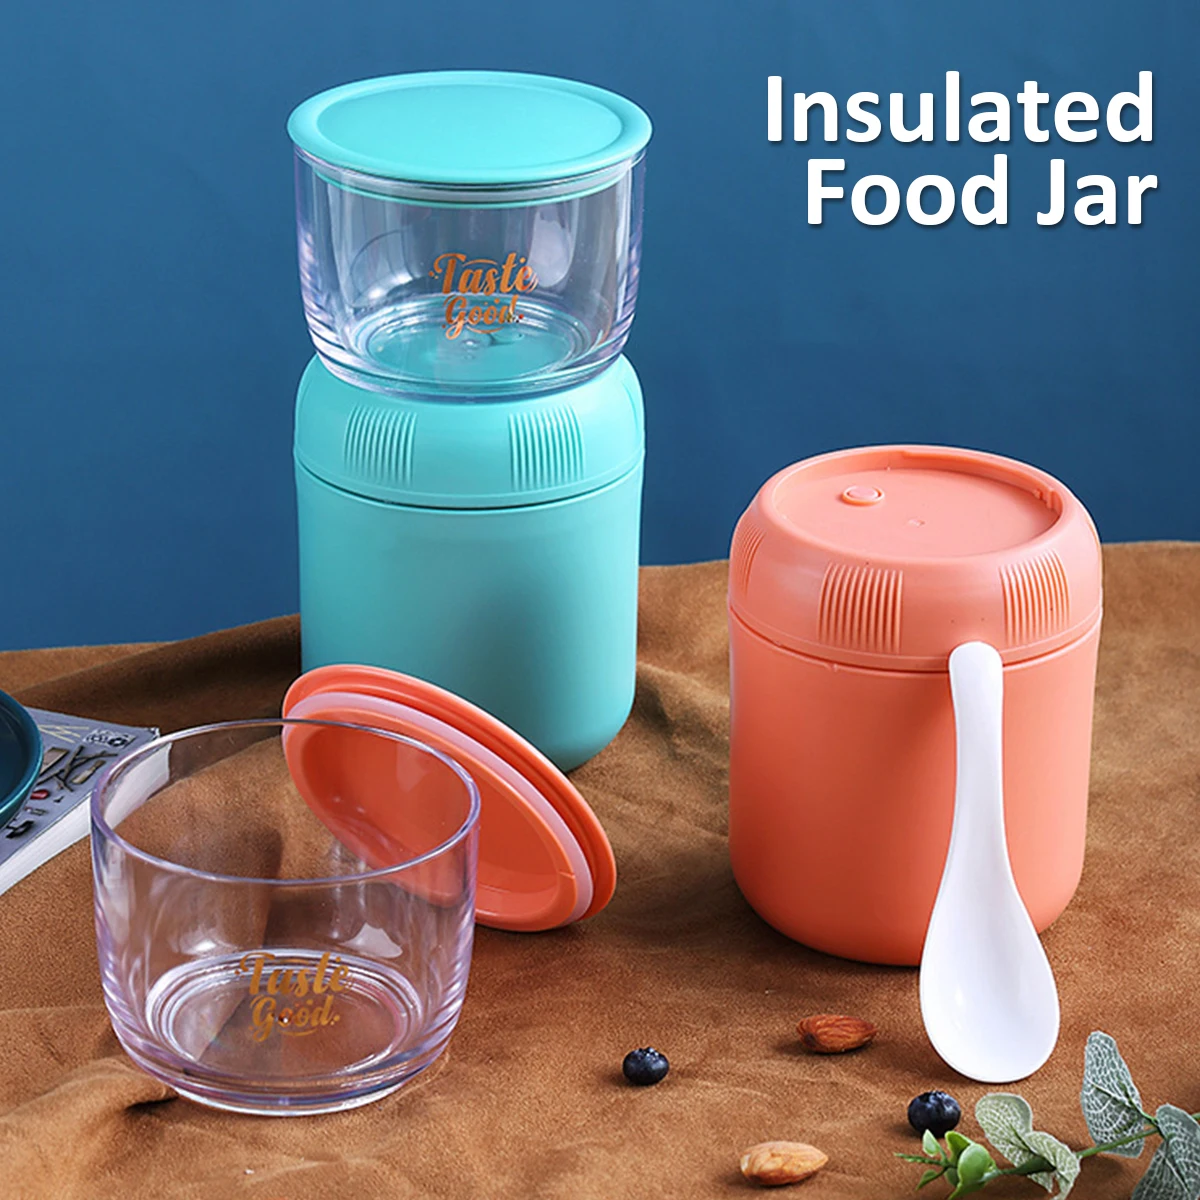 

Insulated Food Jar with Topping Container Oatmeal Yogurt Container Food Soup Jar Stainless Steel Leak-Proof Portable Lunch